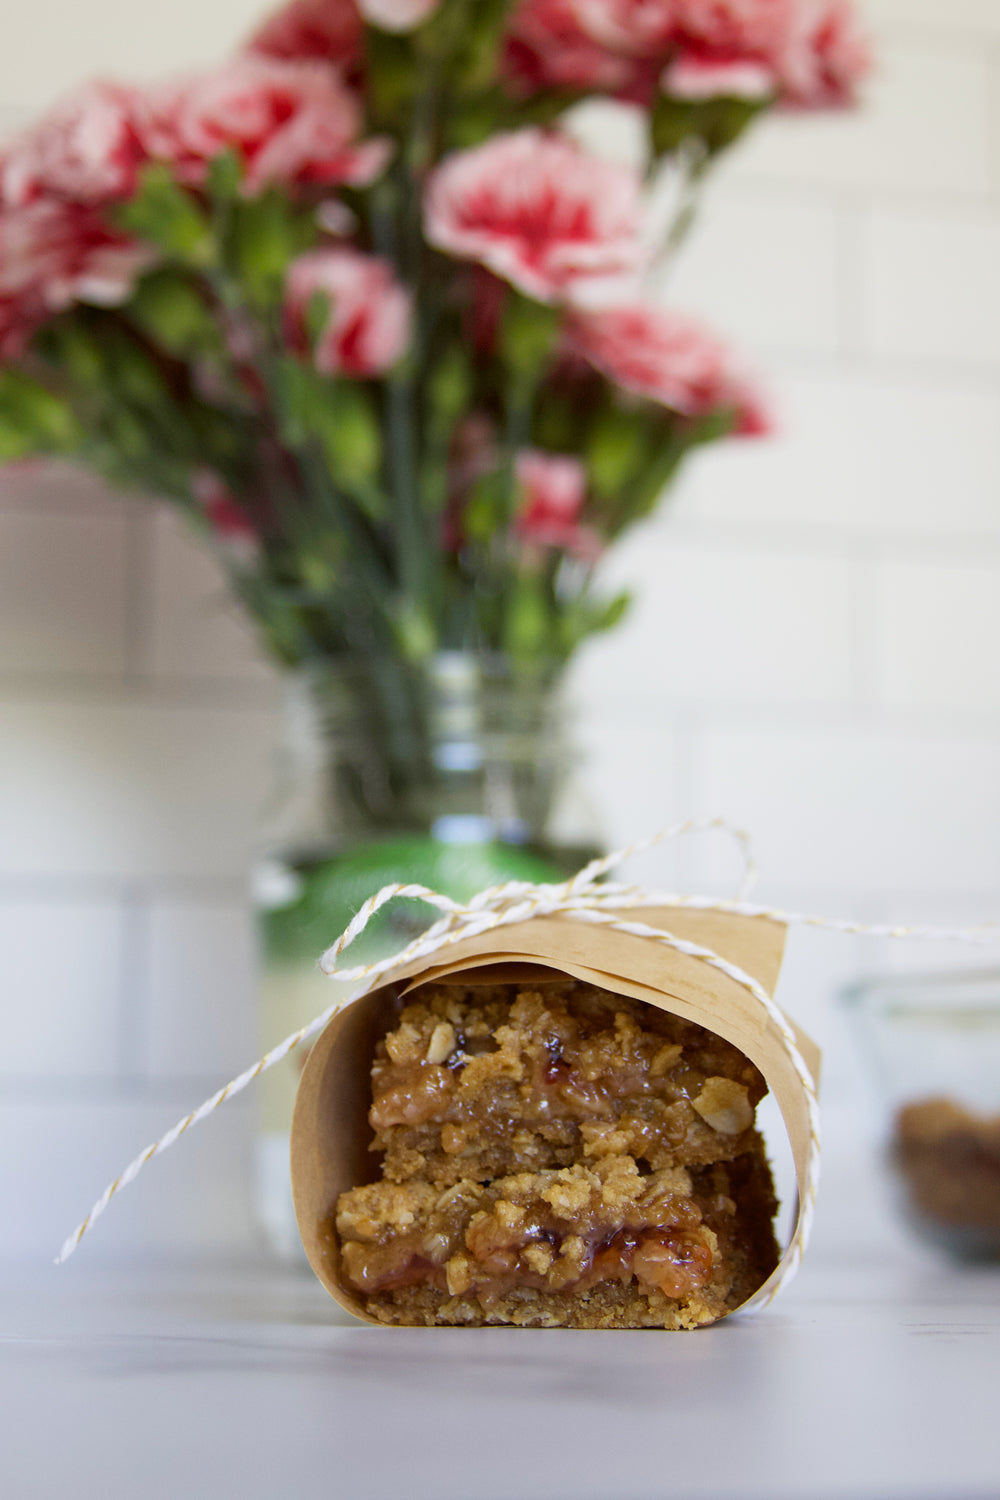 Peanut butter and jelly bars wrapped in paper with pink carnations in a Raven's Nest jar